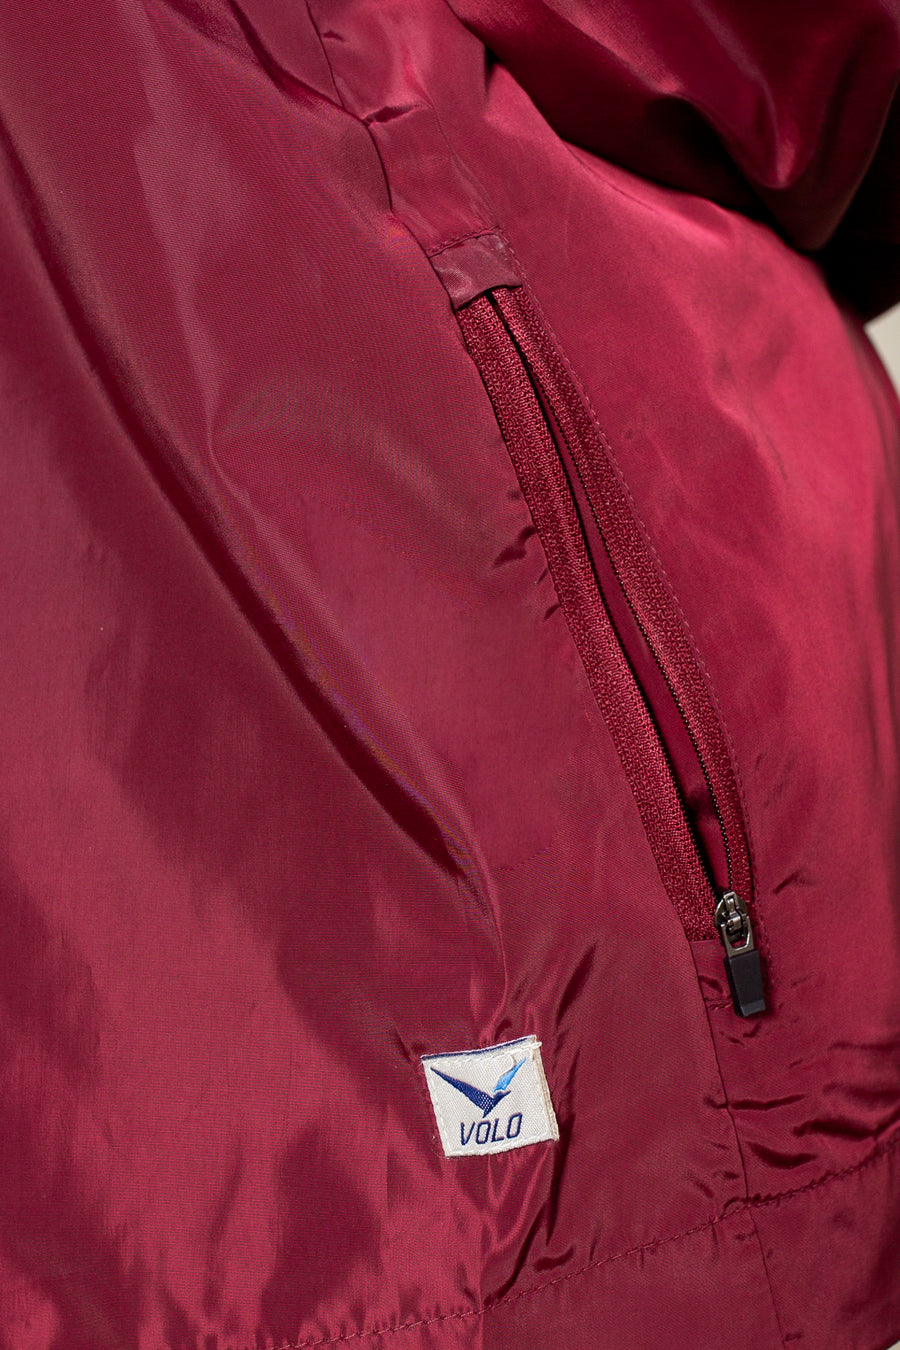 Women's Windansea Jacket in Maroon | VOLO Apparel | The ultimate all year jacket, an ultralight hooded windbreaker, crafted with the revolutionary memory fabric and five pockets. This jacket is full of features, water repellant, three zipper pockets, UPF 50 protection from the sun and tailored fit to look super stylish while being ready for any adventure.